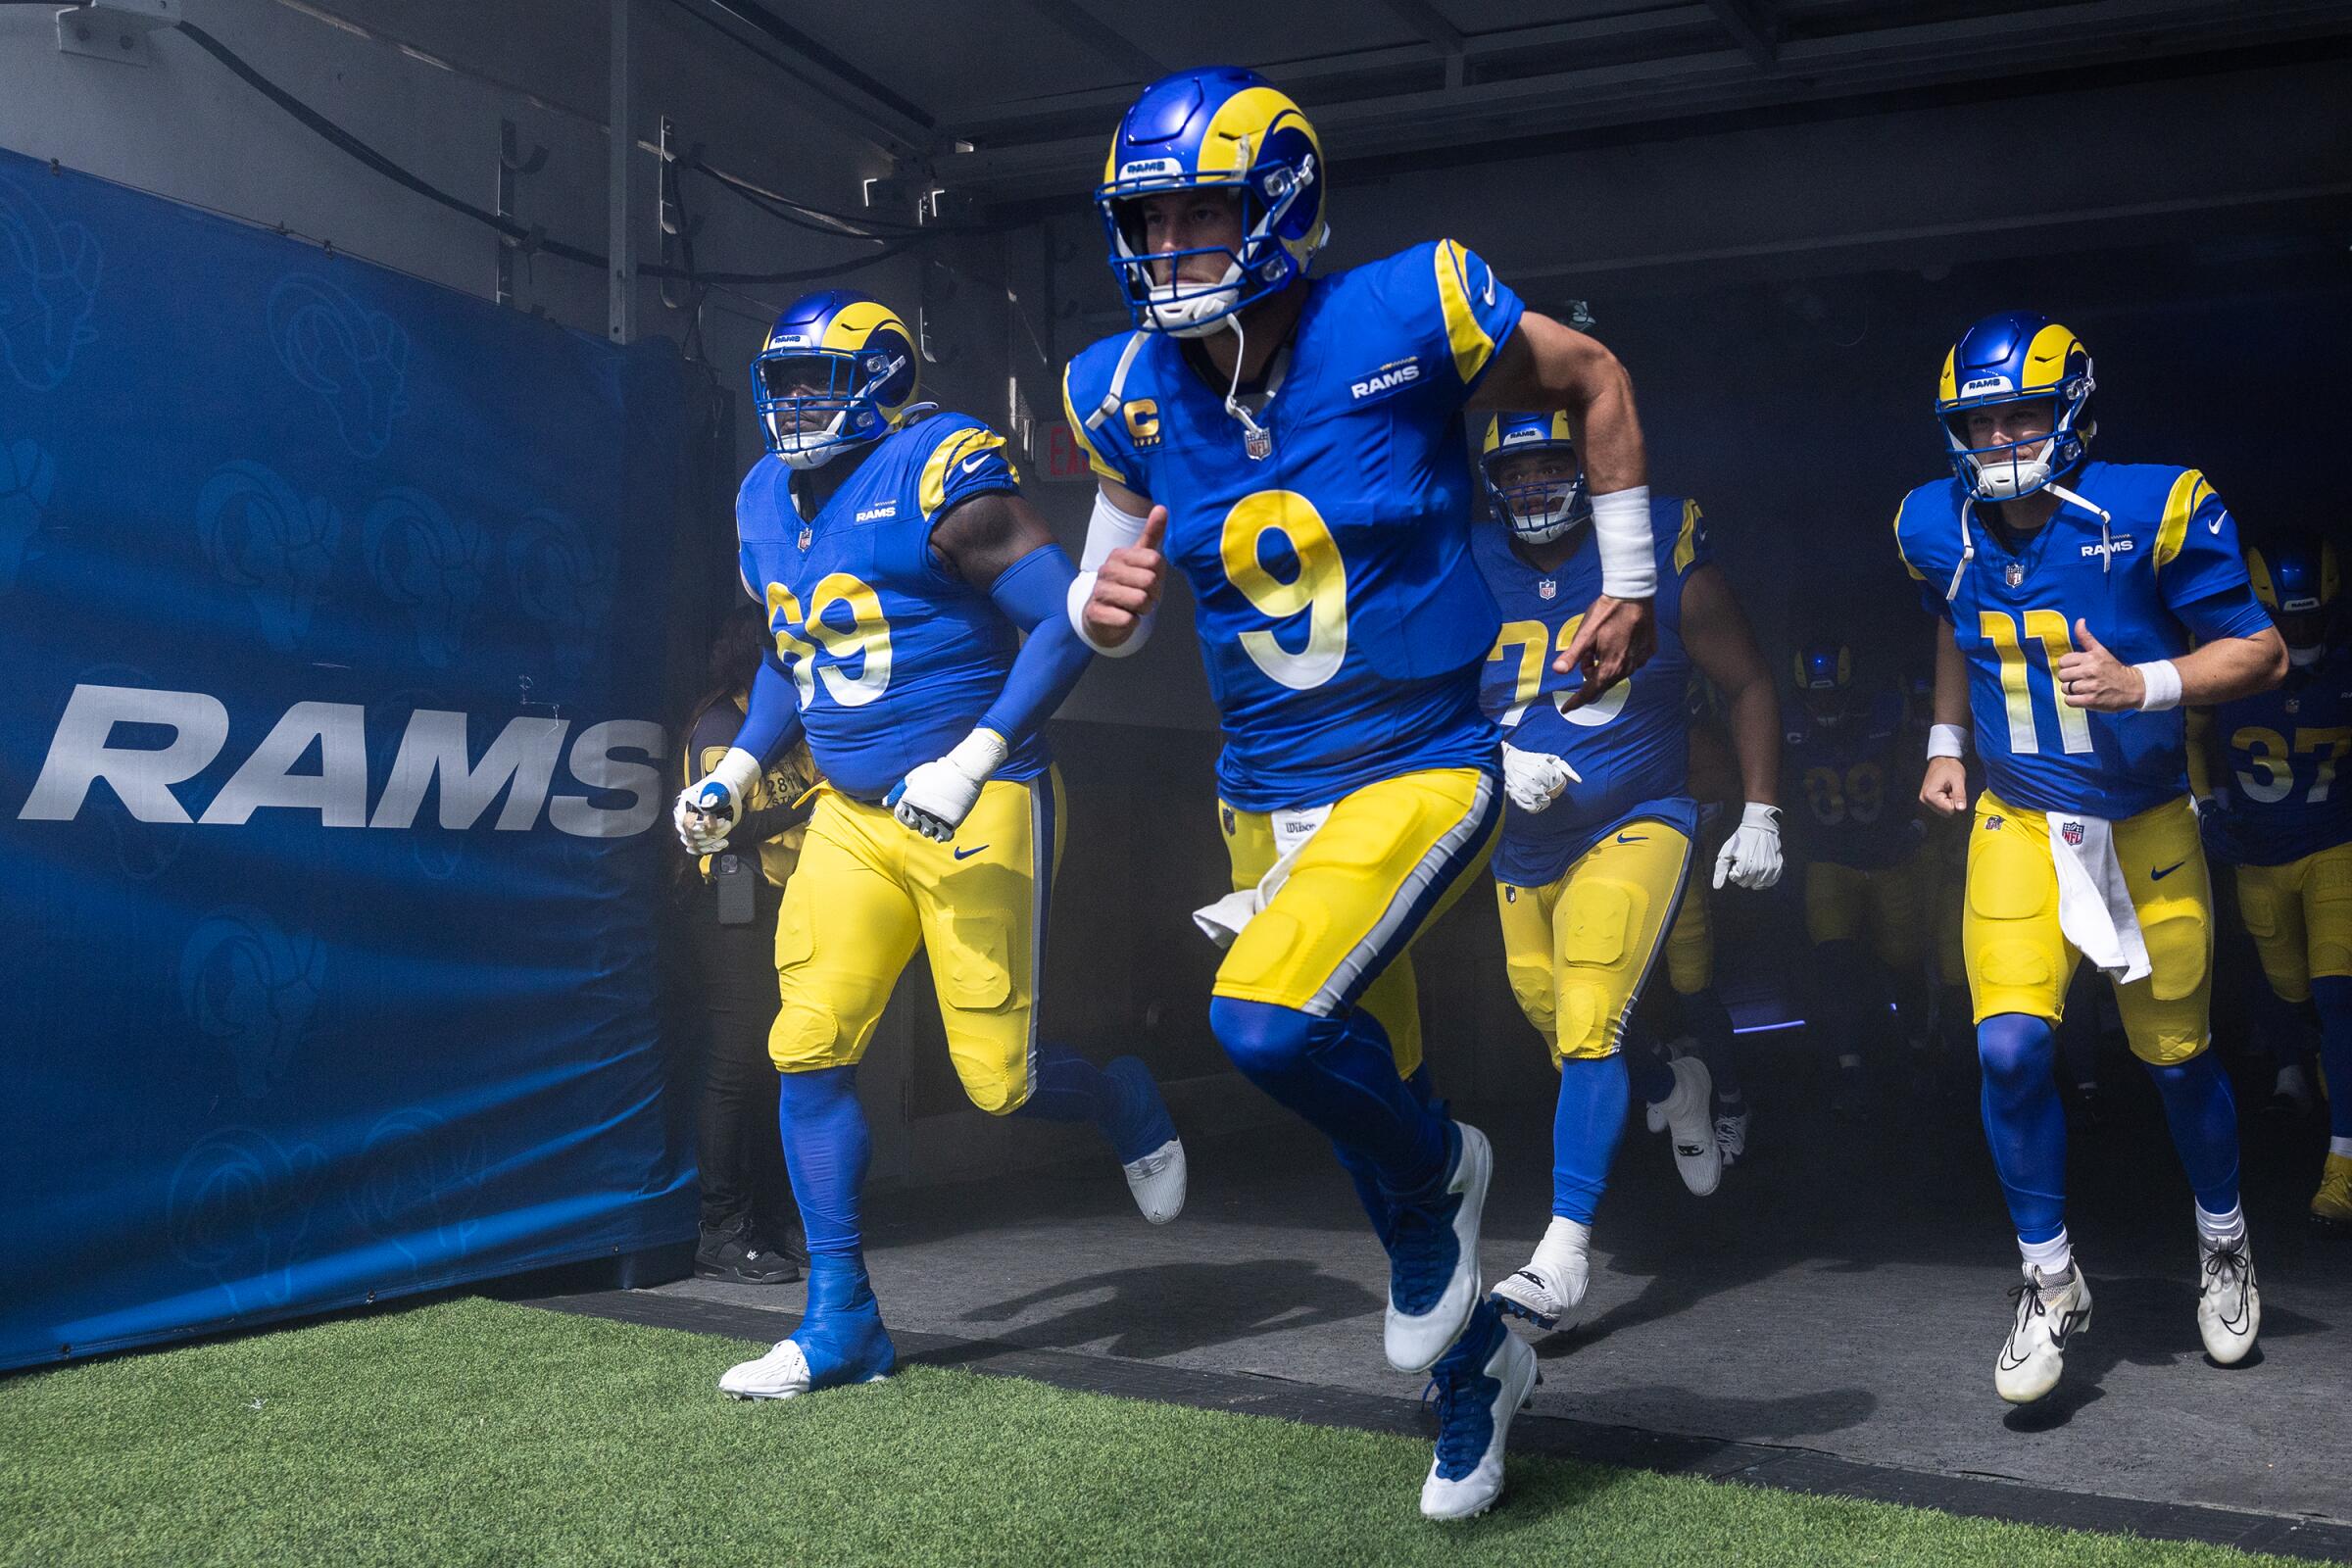 Rams quarterback Matthew Stafford leads his teammates onto the field before a game against the Cardinals at SoFi Stadium.